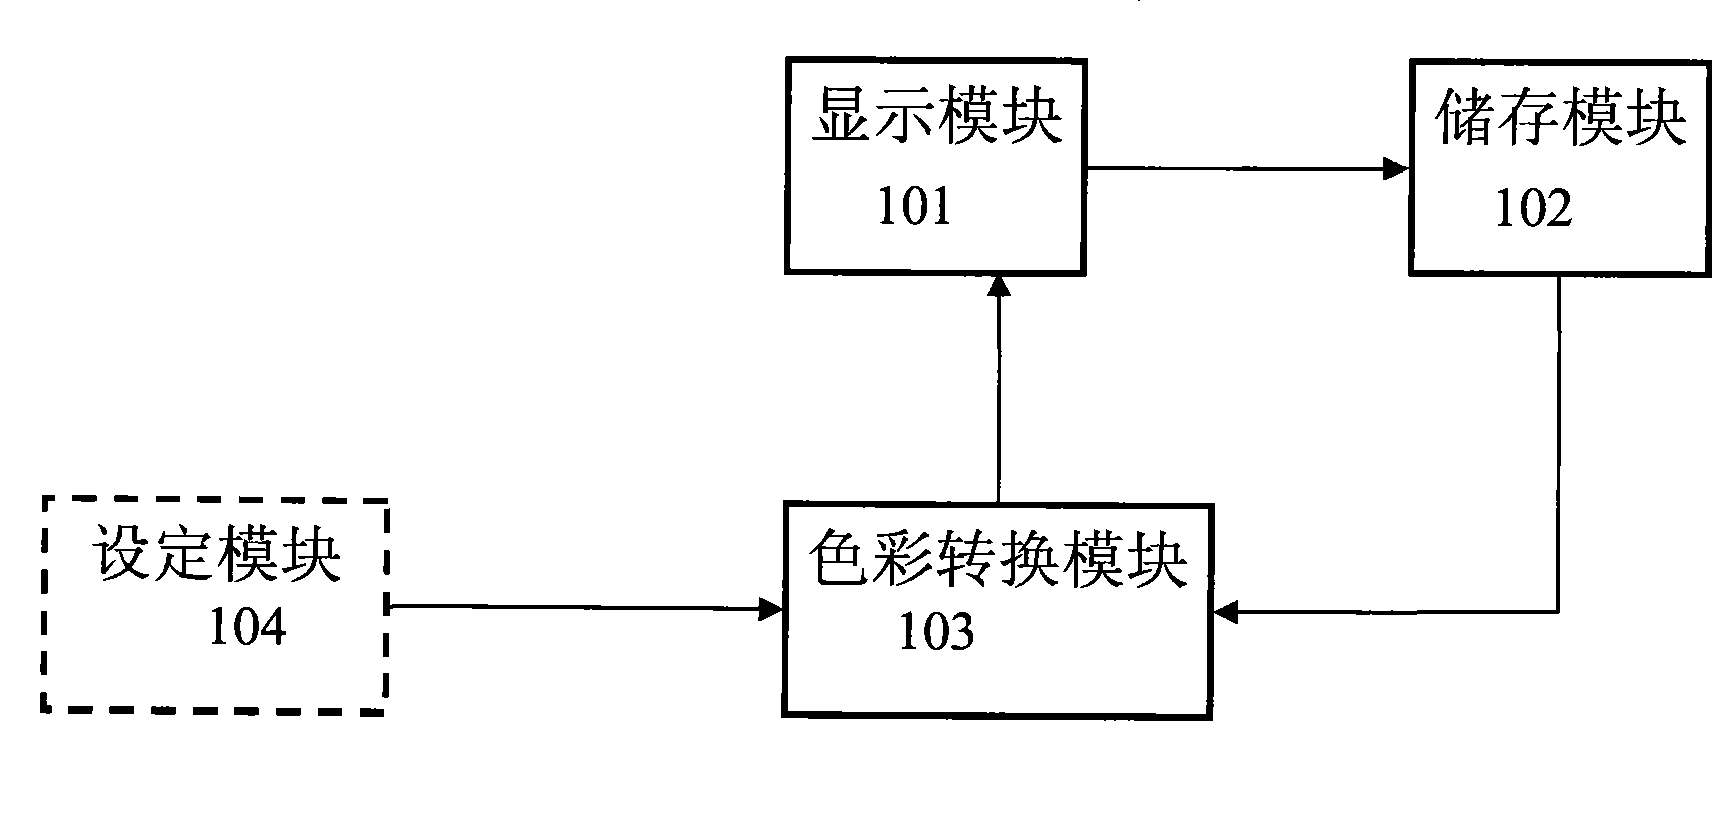 Electronic programme arrangement system and method with color cuing display